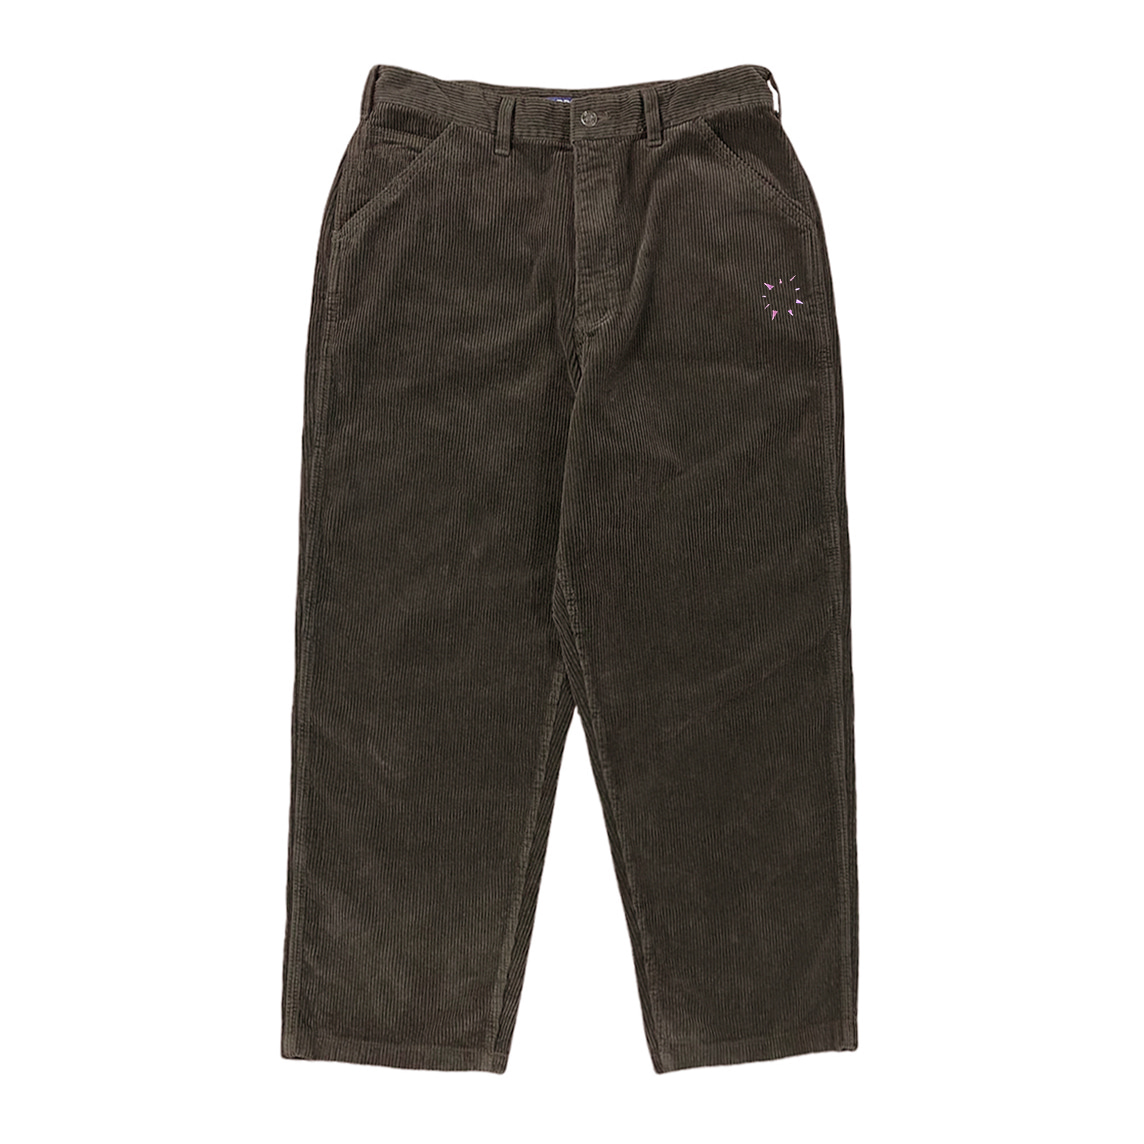 Punched Man Corduroy Pants (Brown)